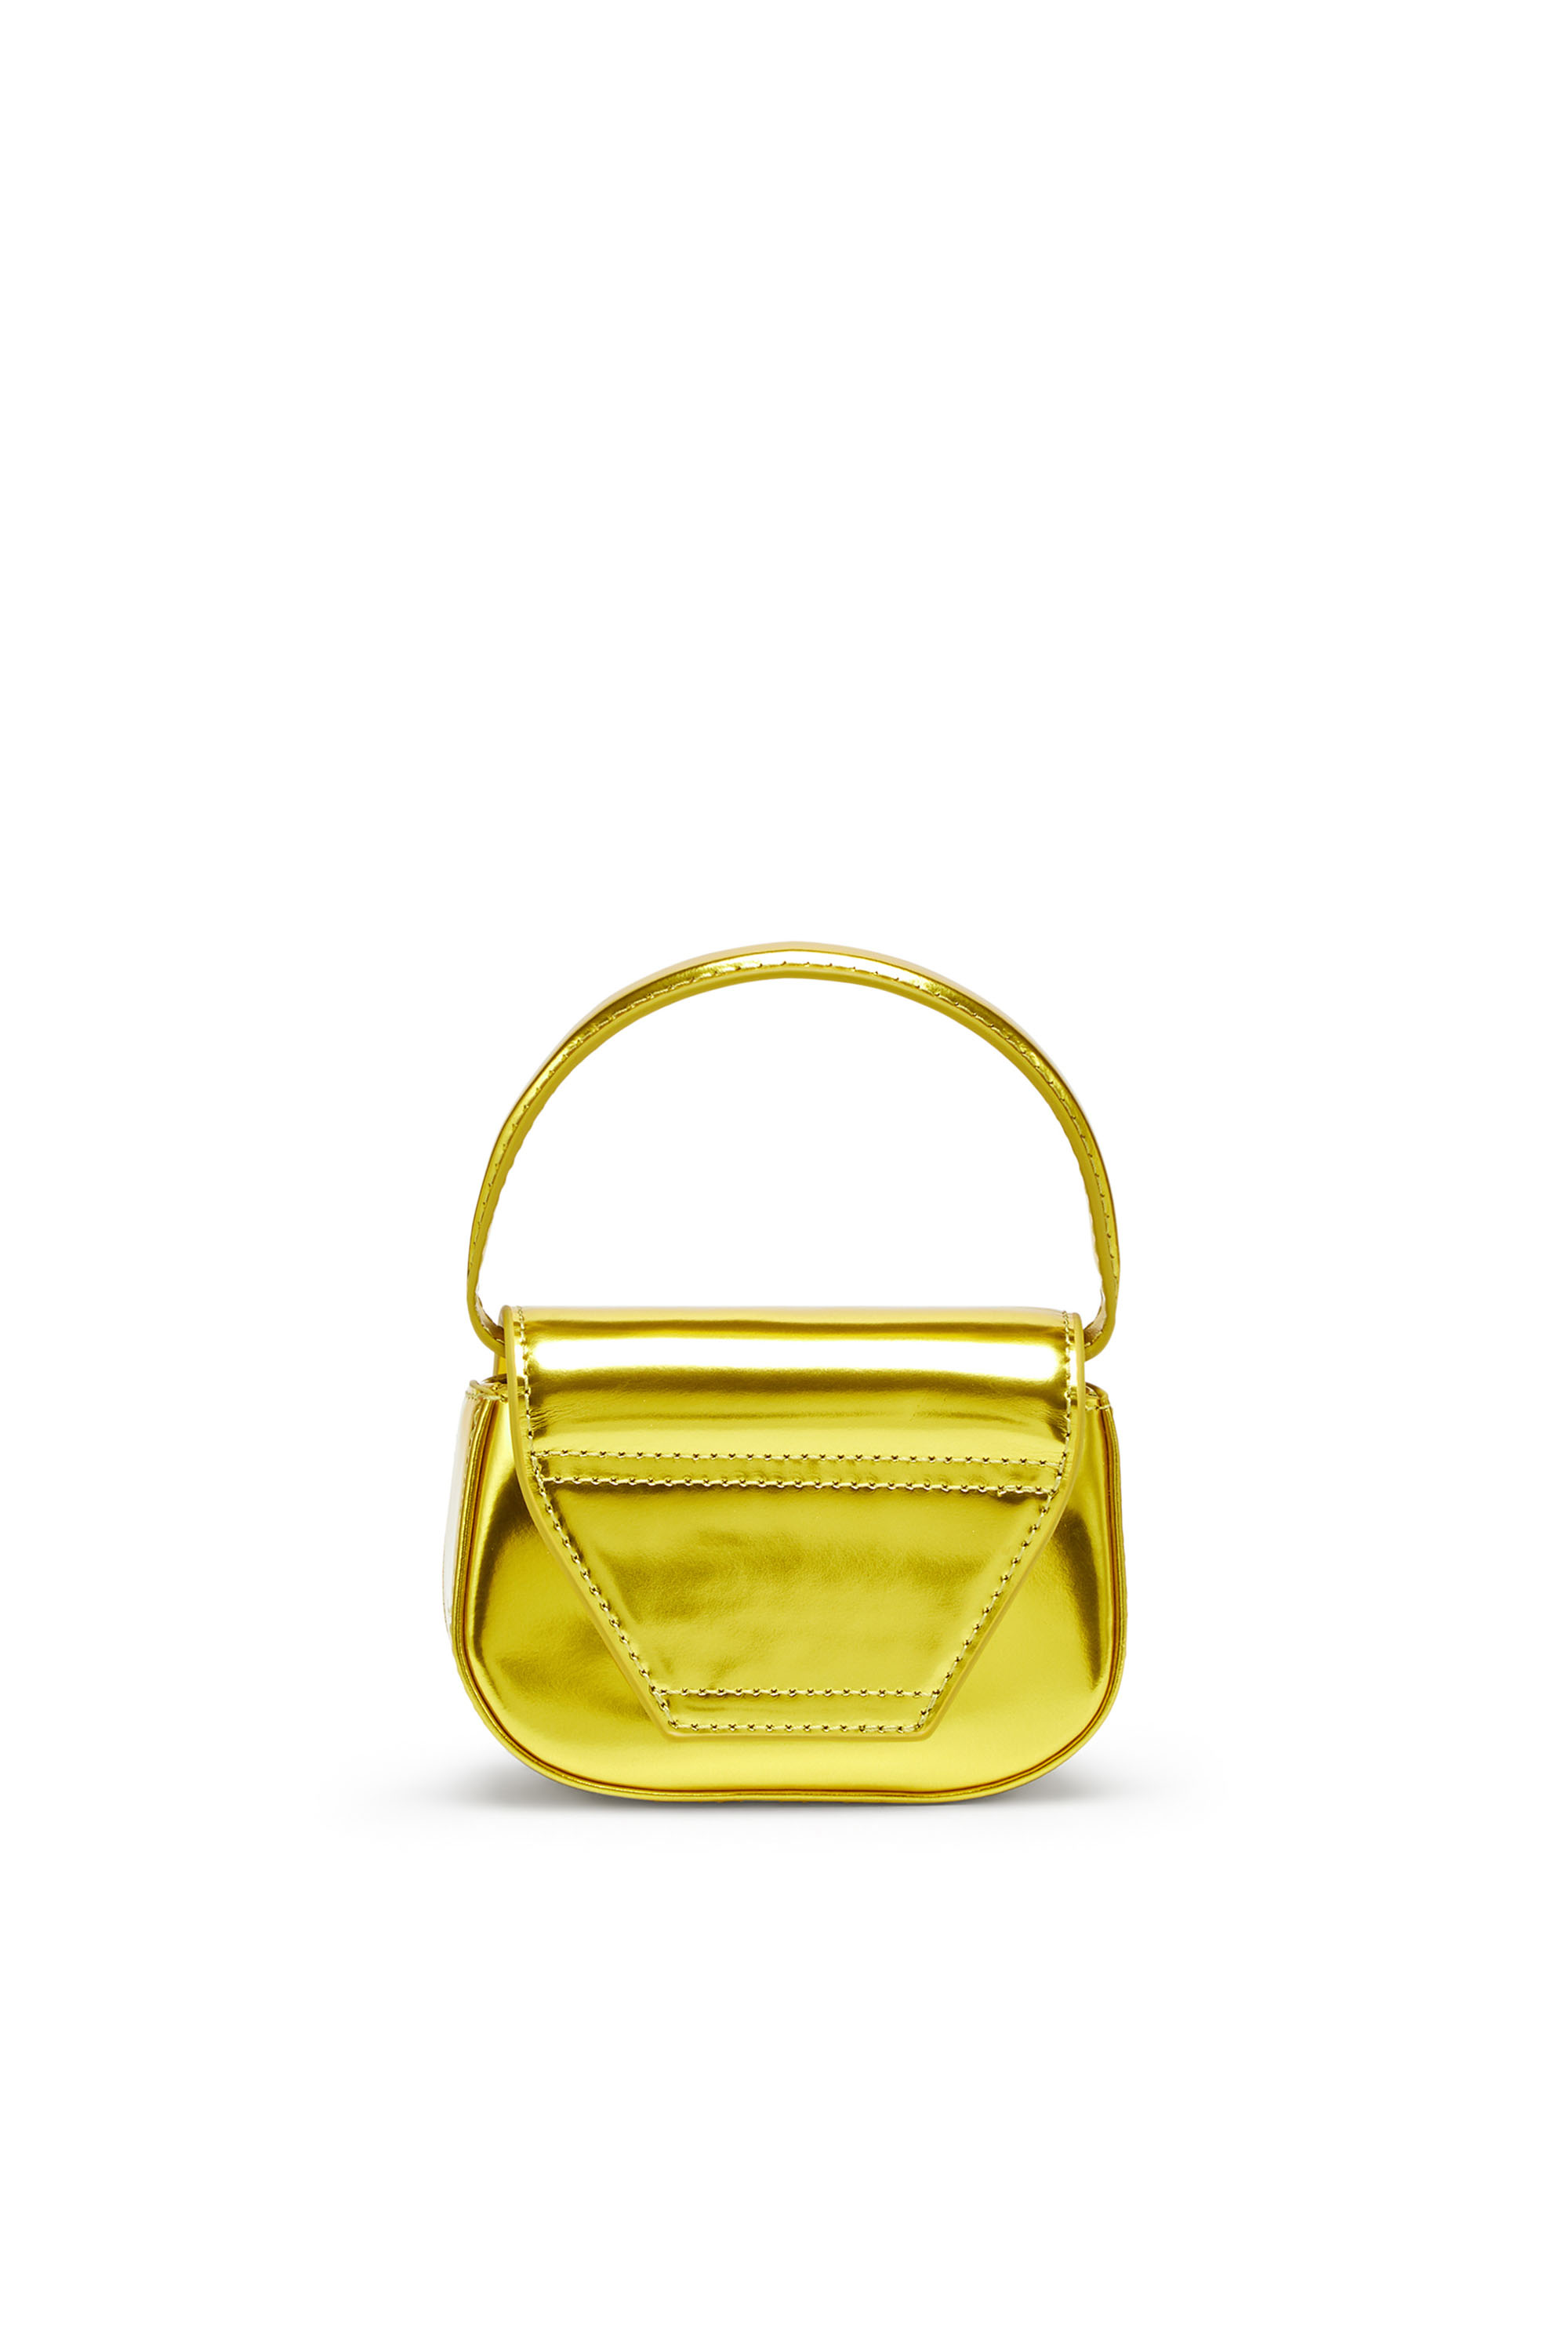 Diesel - 1DR-XS-S, Woman 1DR-XS-S-Iconic mini bag in mirrored leather in Yellow - Image 2